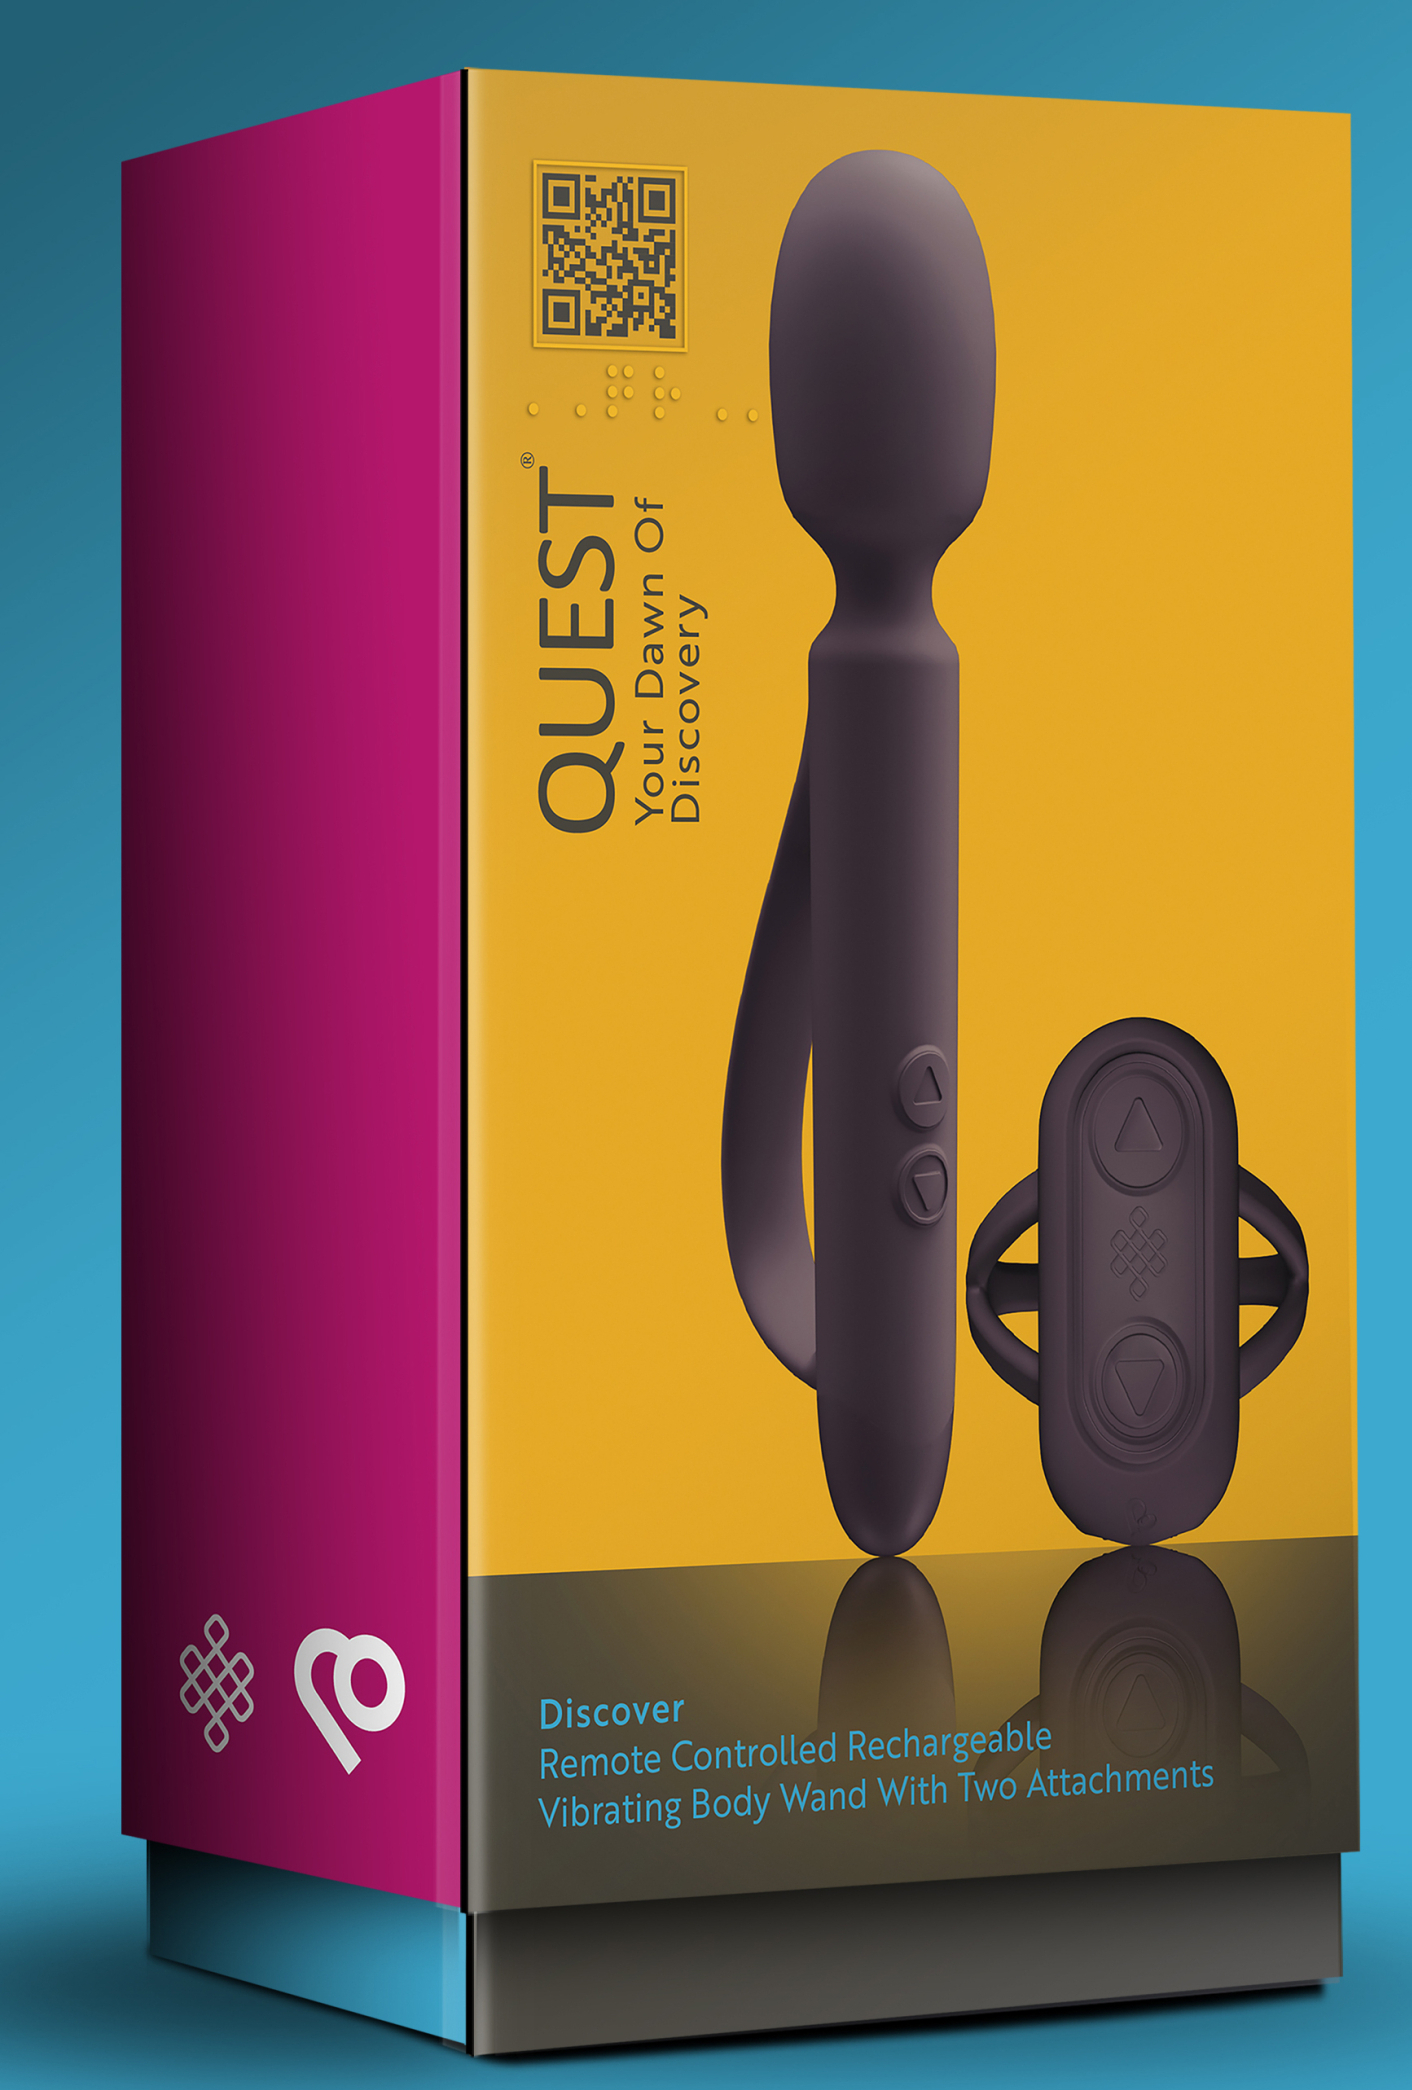 A boxed "Discover" sex toy from the quest range. The box is orange, purple and blue, and the sex toy and remote control are displayed on the front.